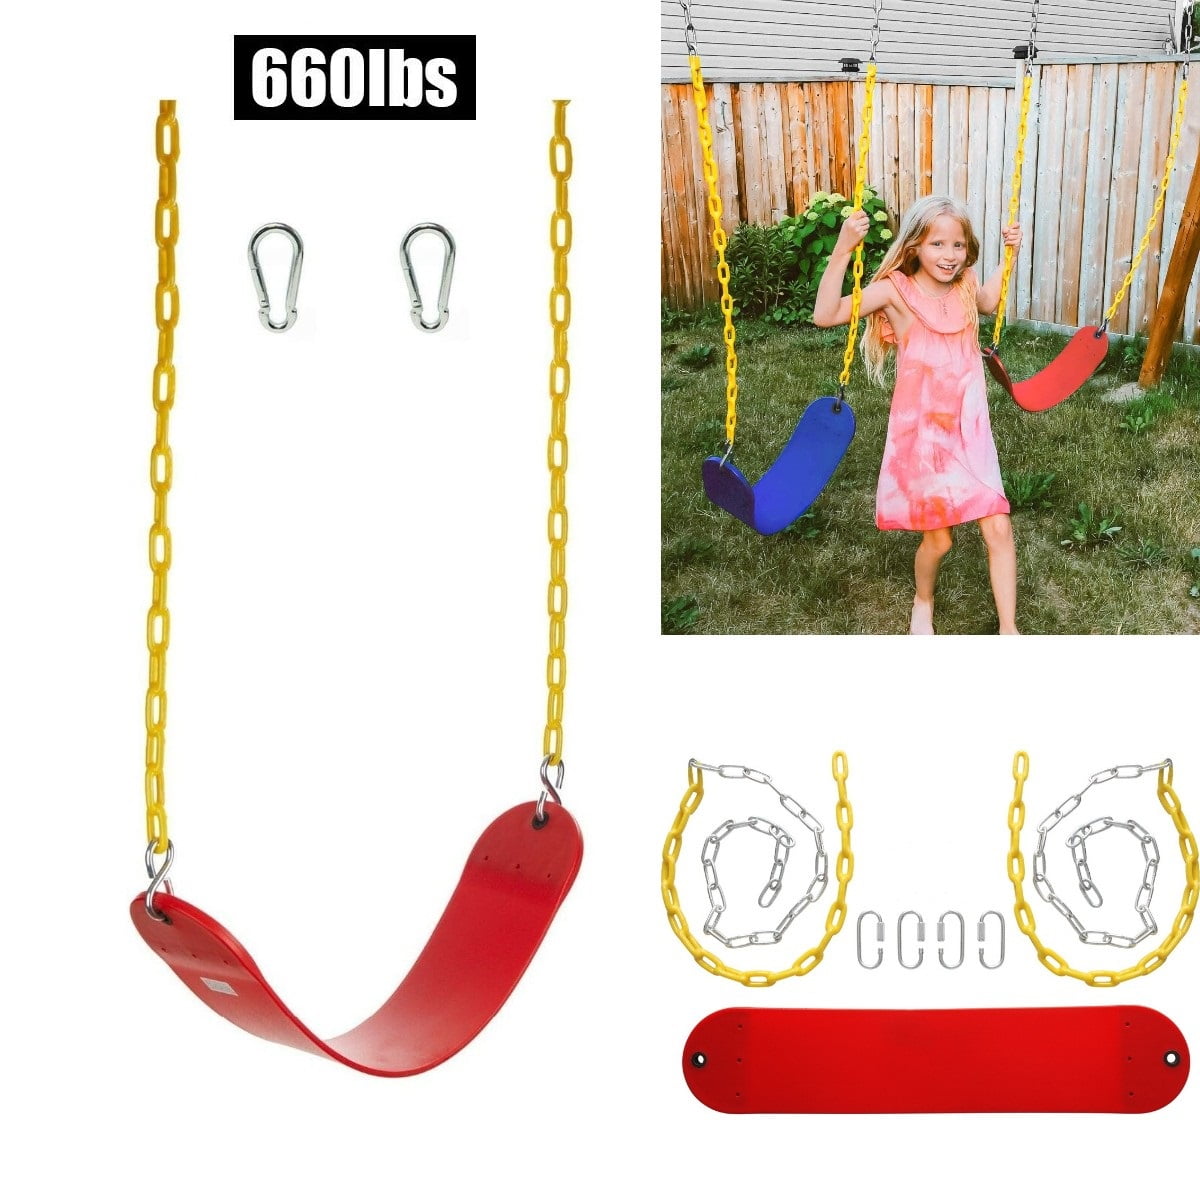 Swing Seats Set Accessories Replacement Kit Outdoor Kids Child Sport Gyms 660lbs 